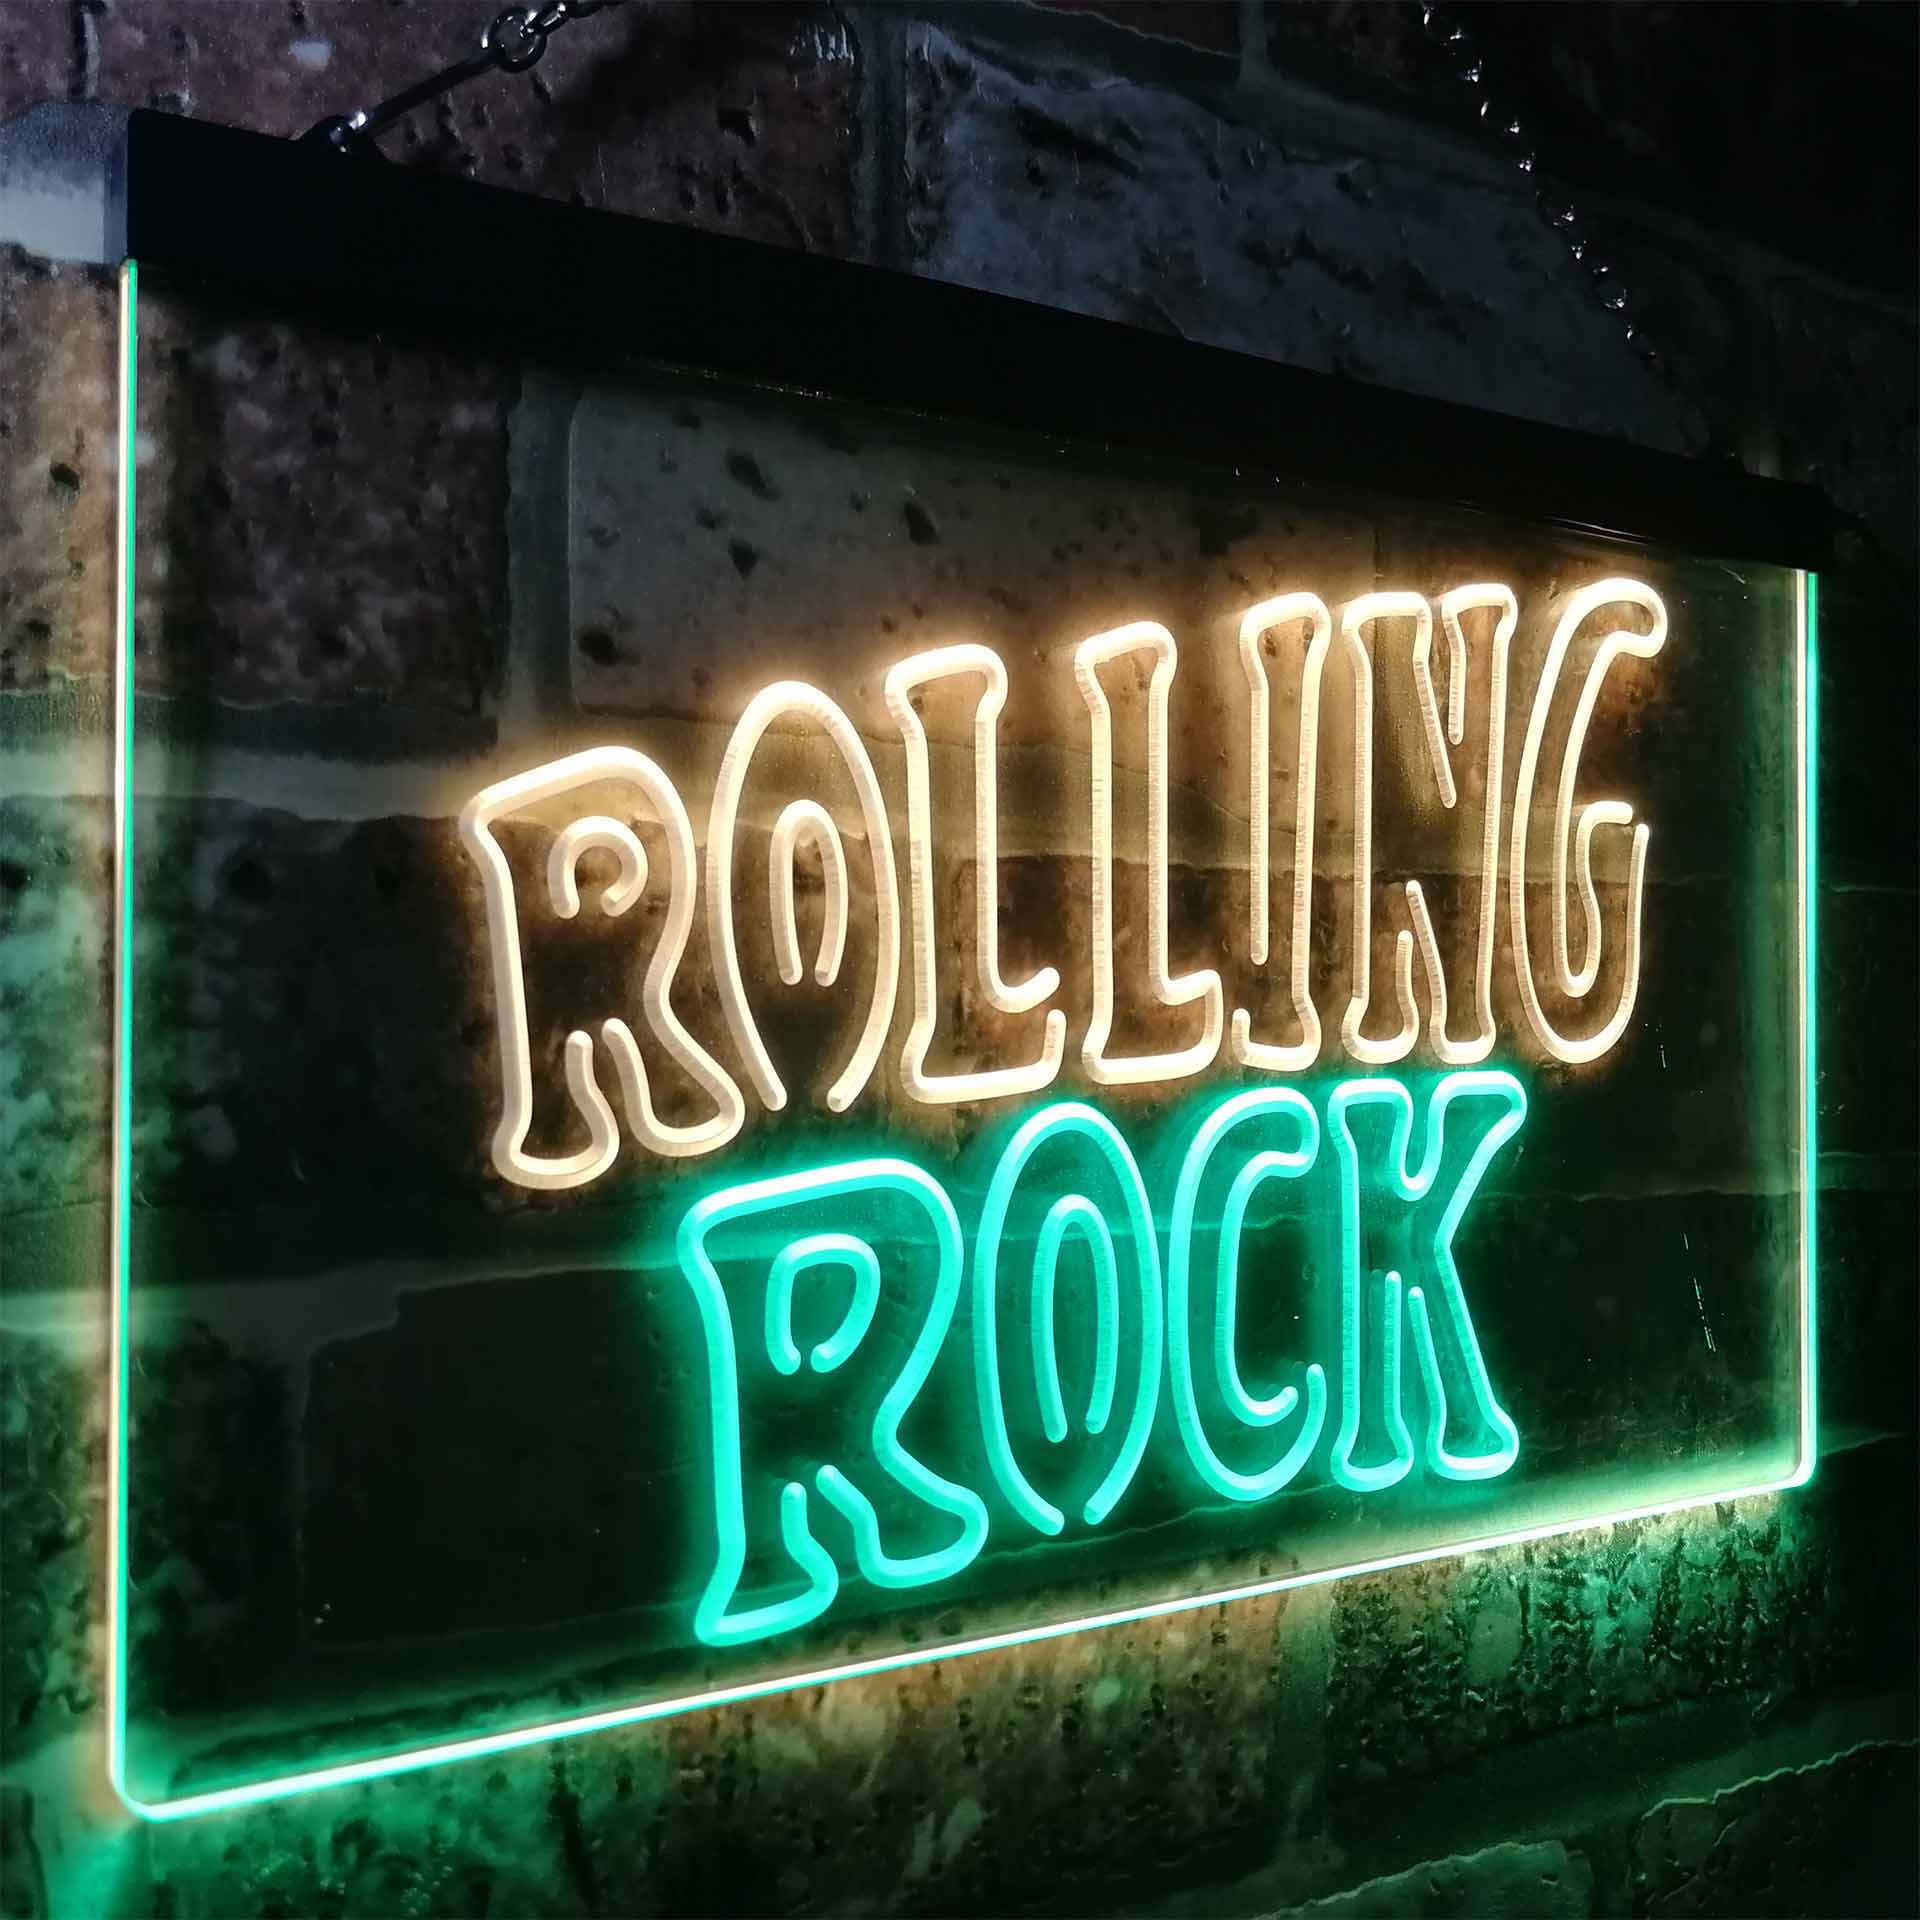 Rolling Rock Music Neon LED Sign